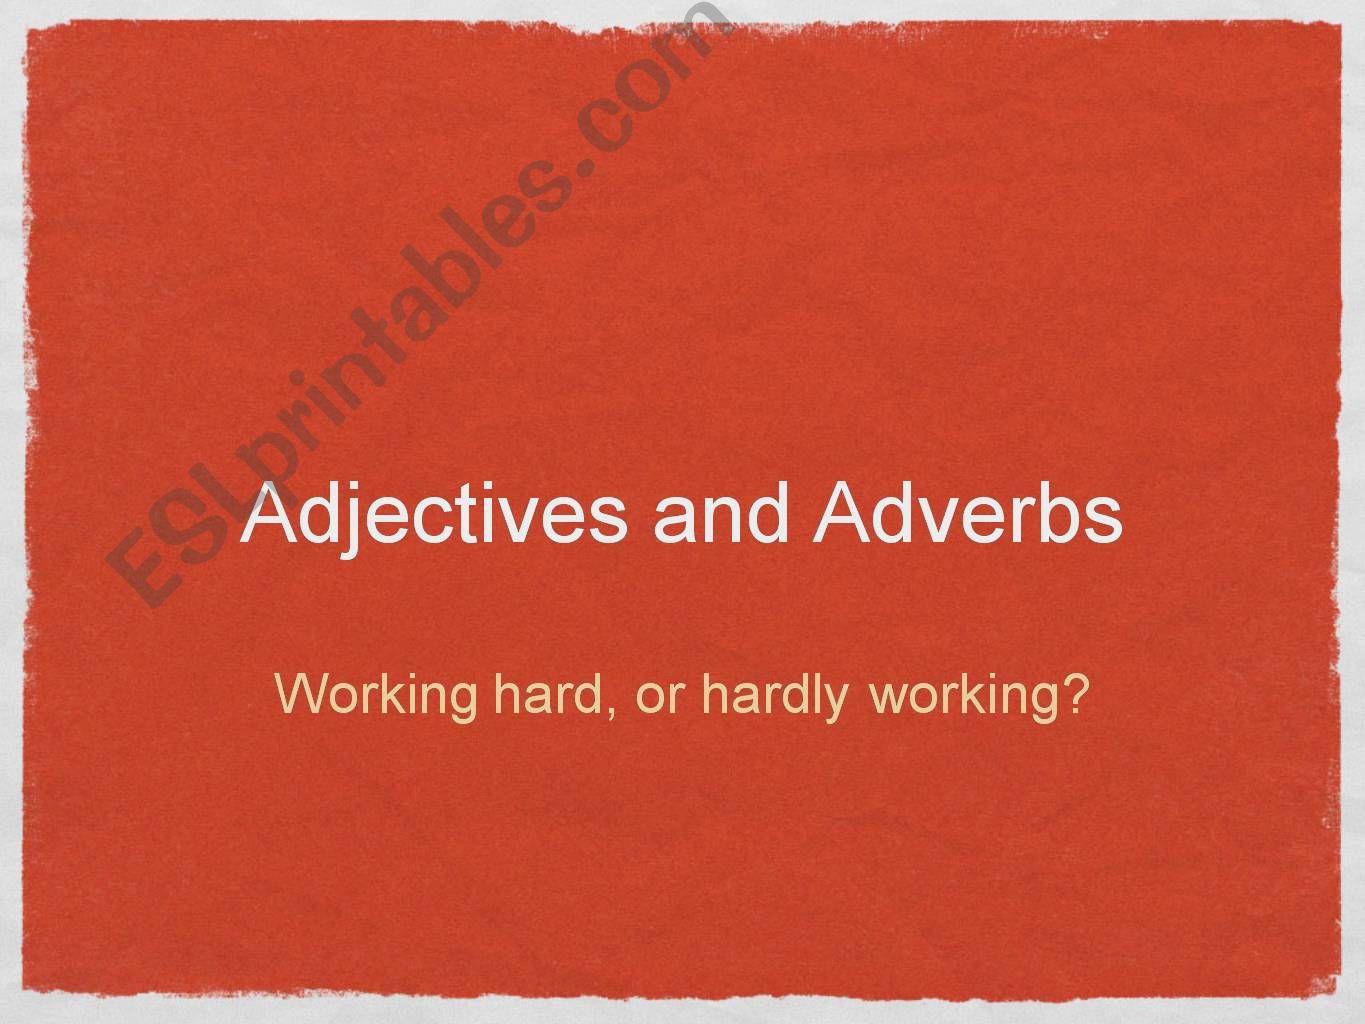 Adverbs and Adjectives powerpoint